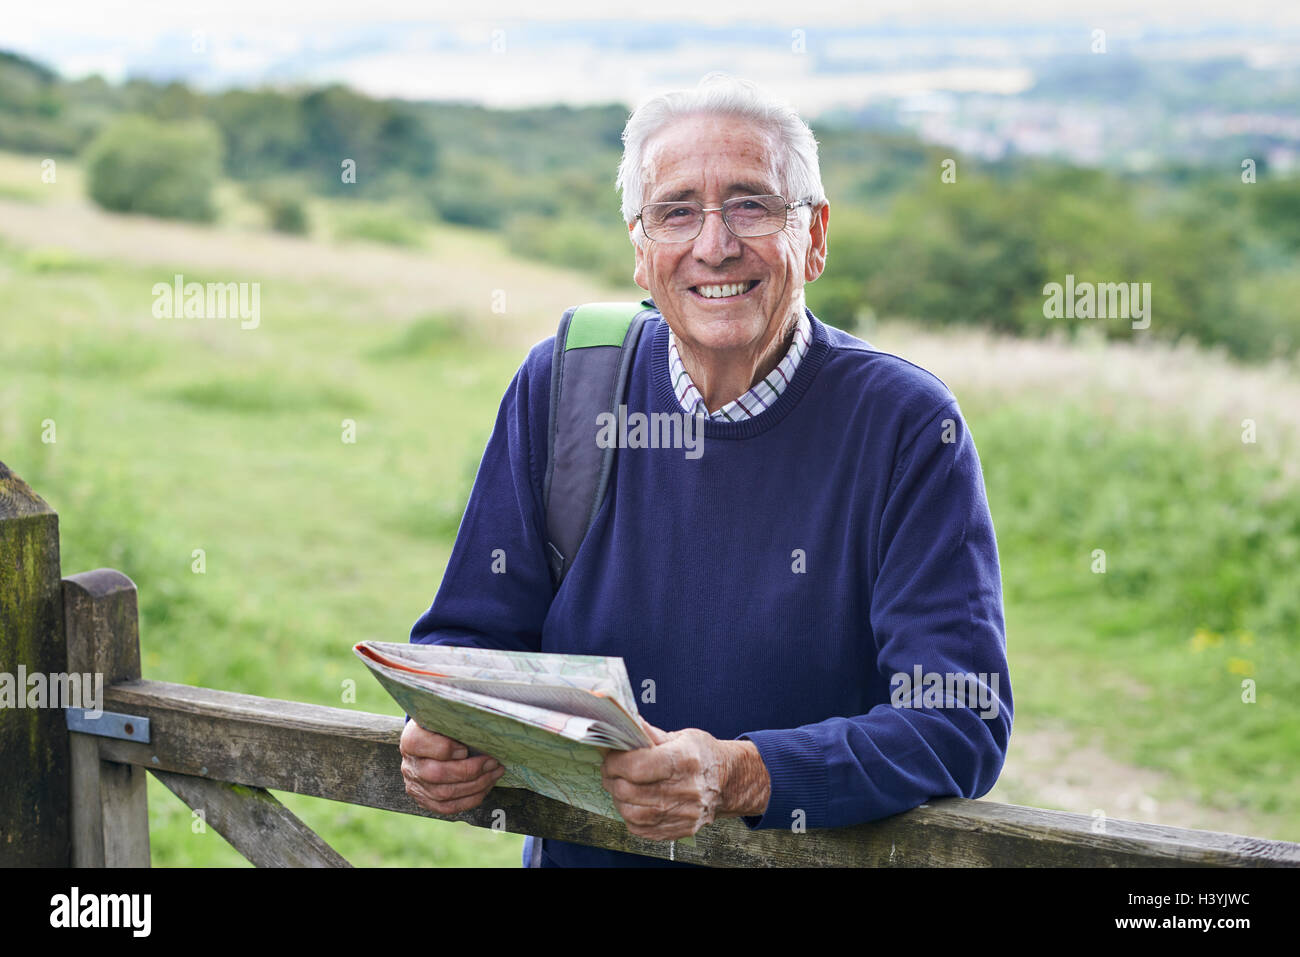 Portrait of Senior Man Hiking in Countryside Banque D'Images